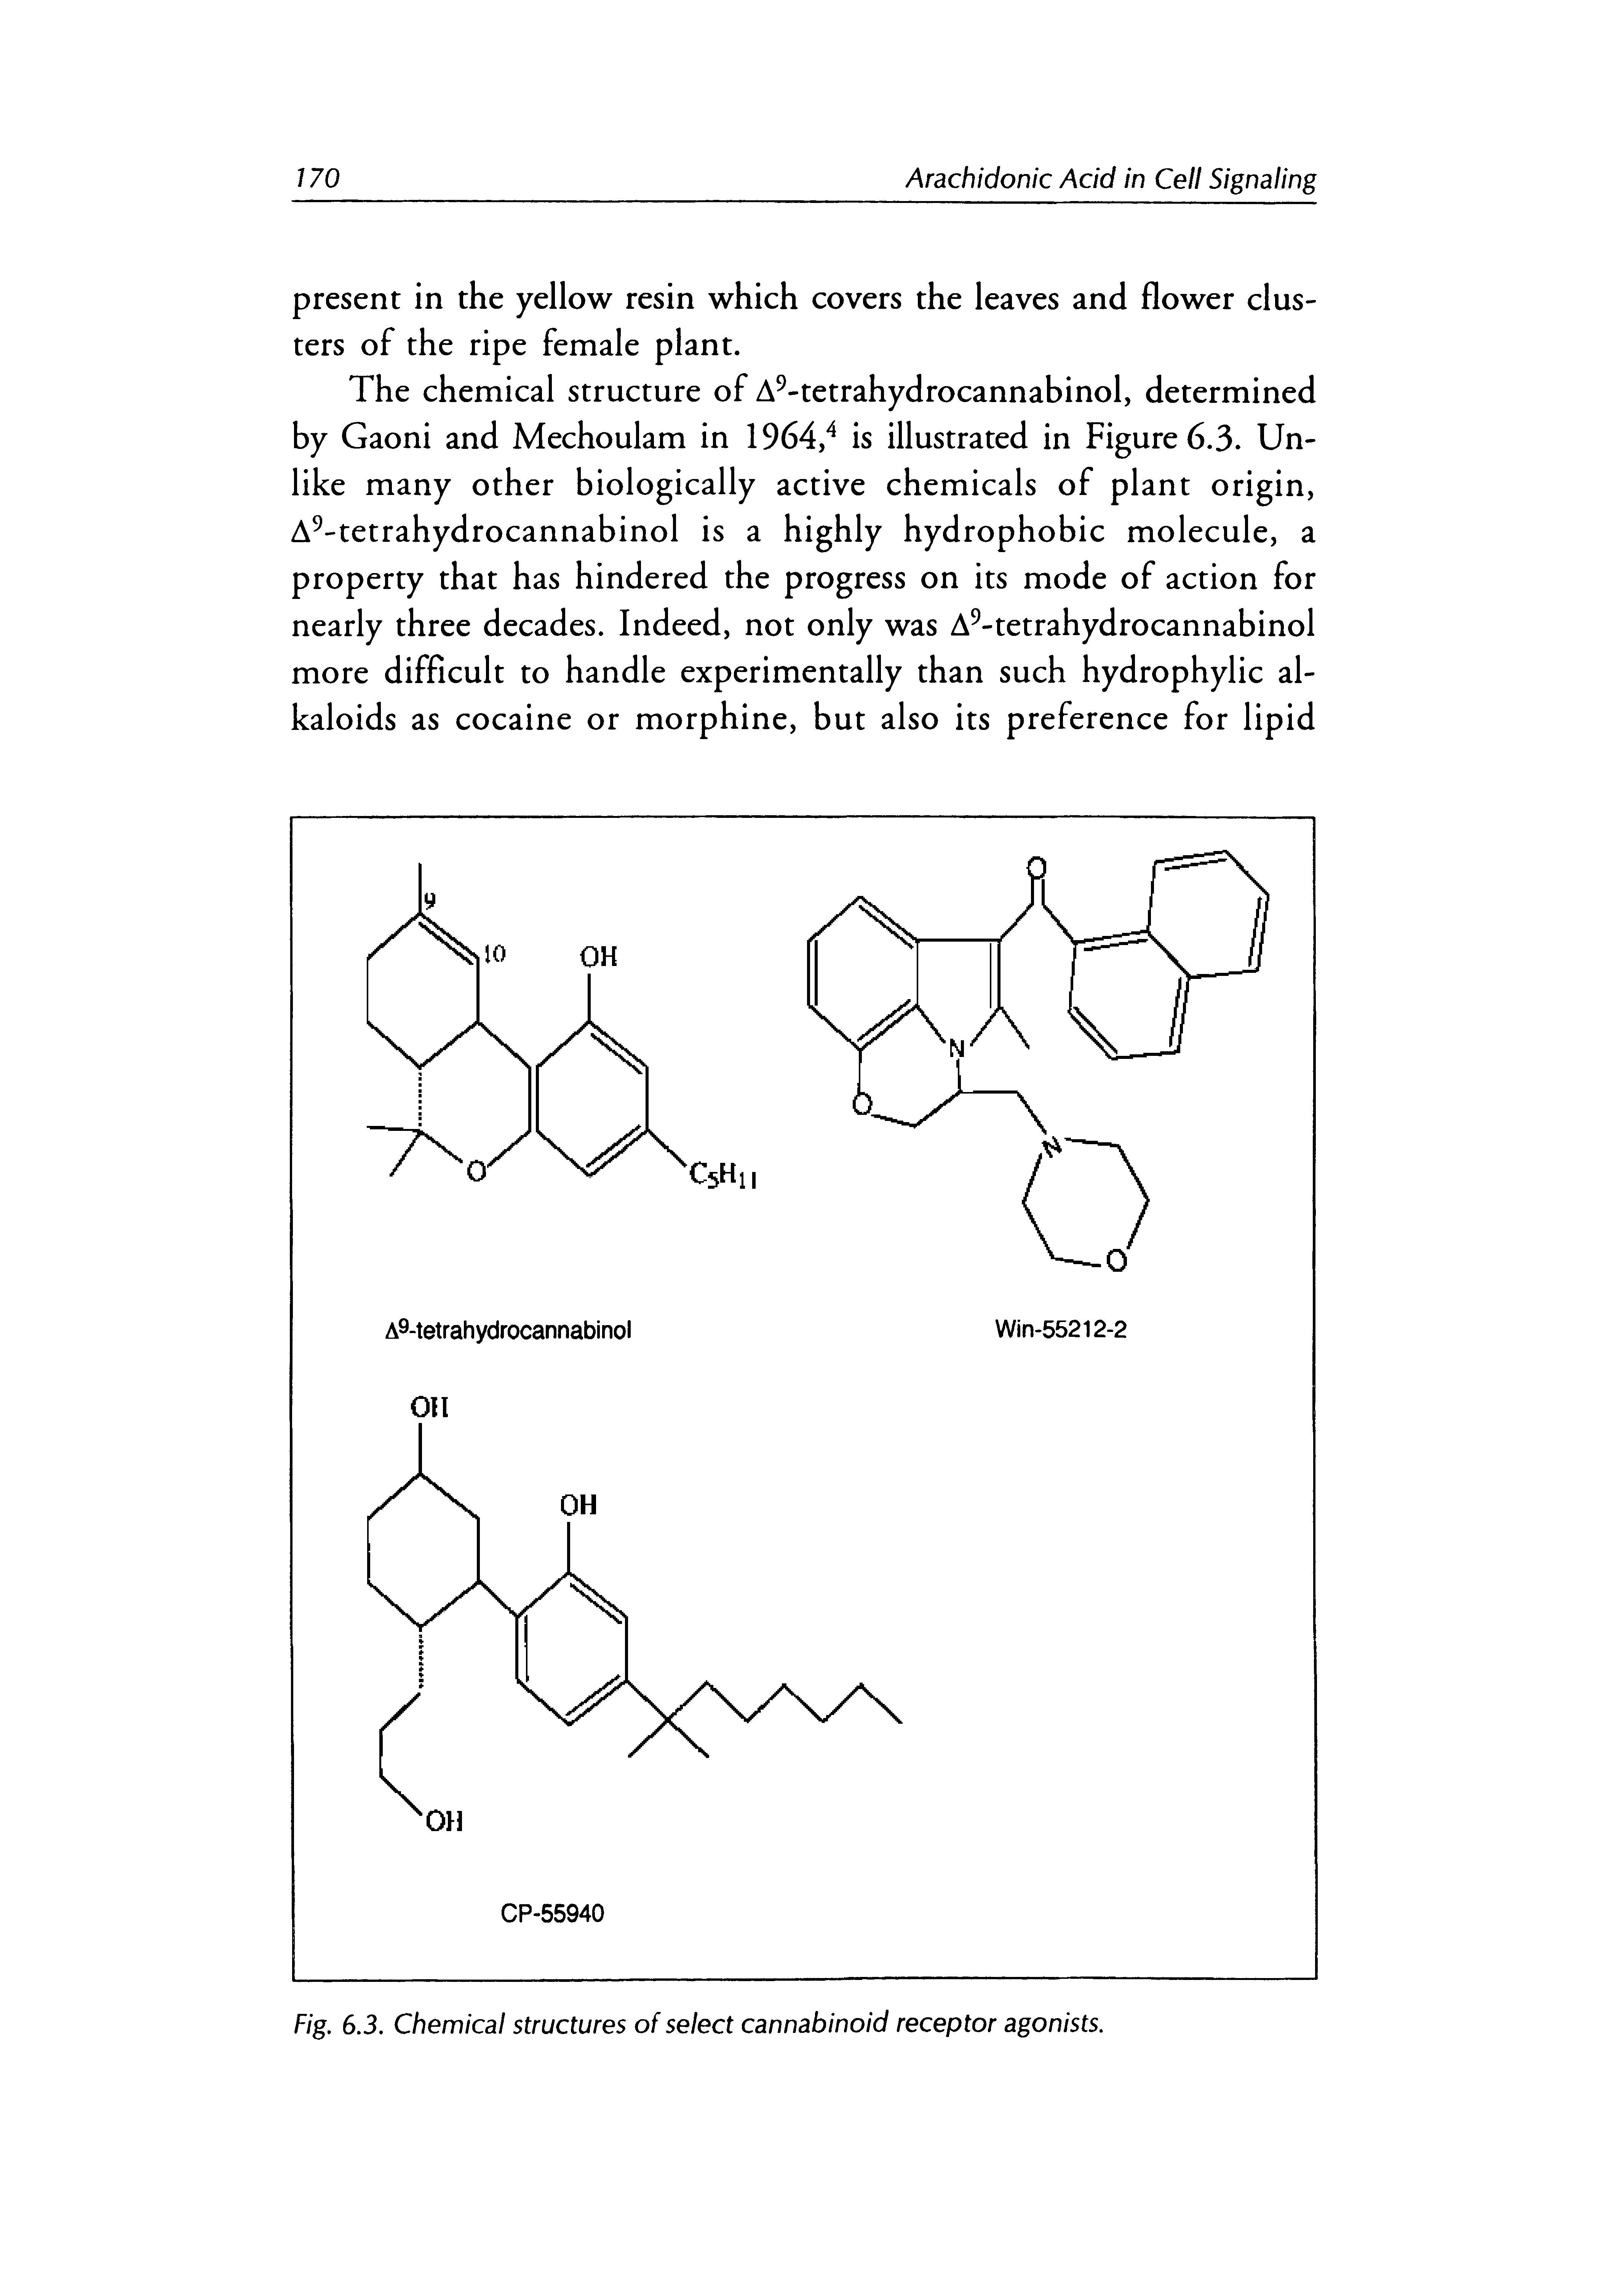 Fig. 6.3. Chemical structures of select cannabinoid receptor agonists.